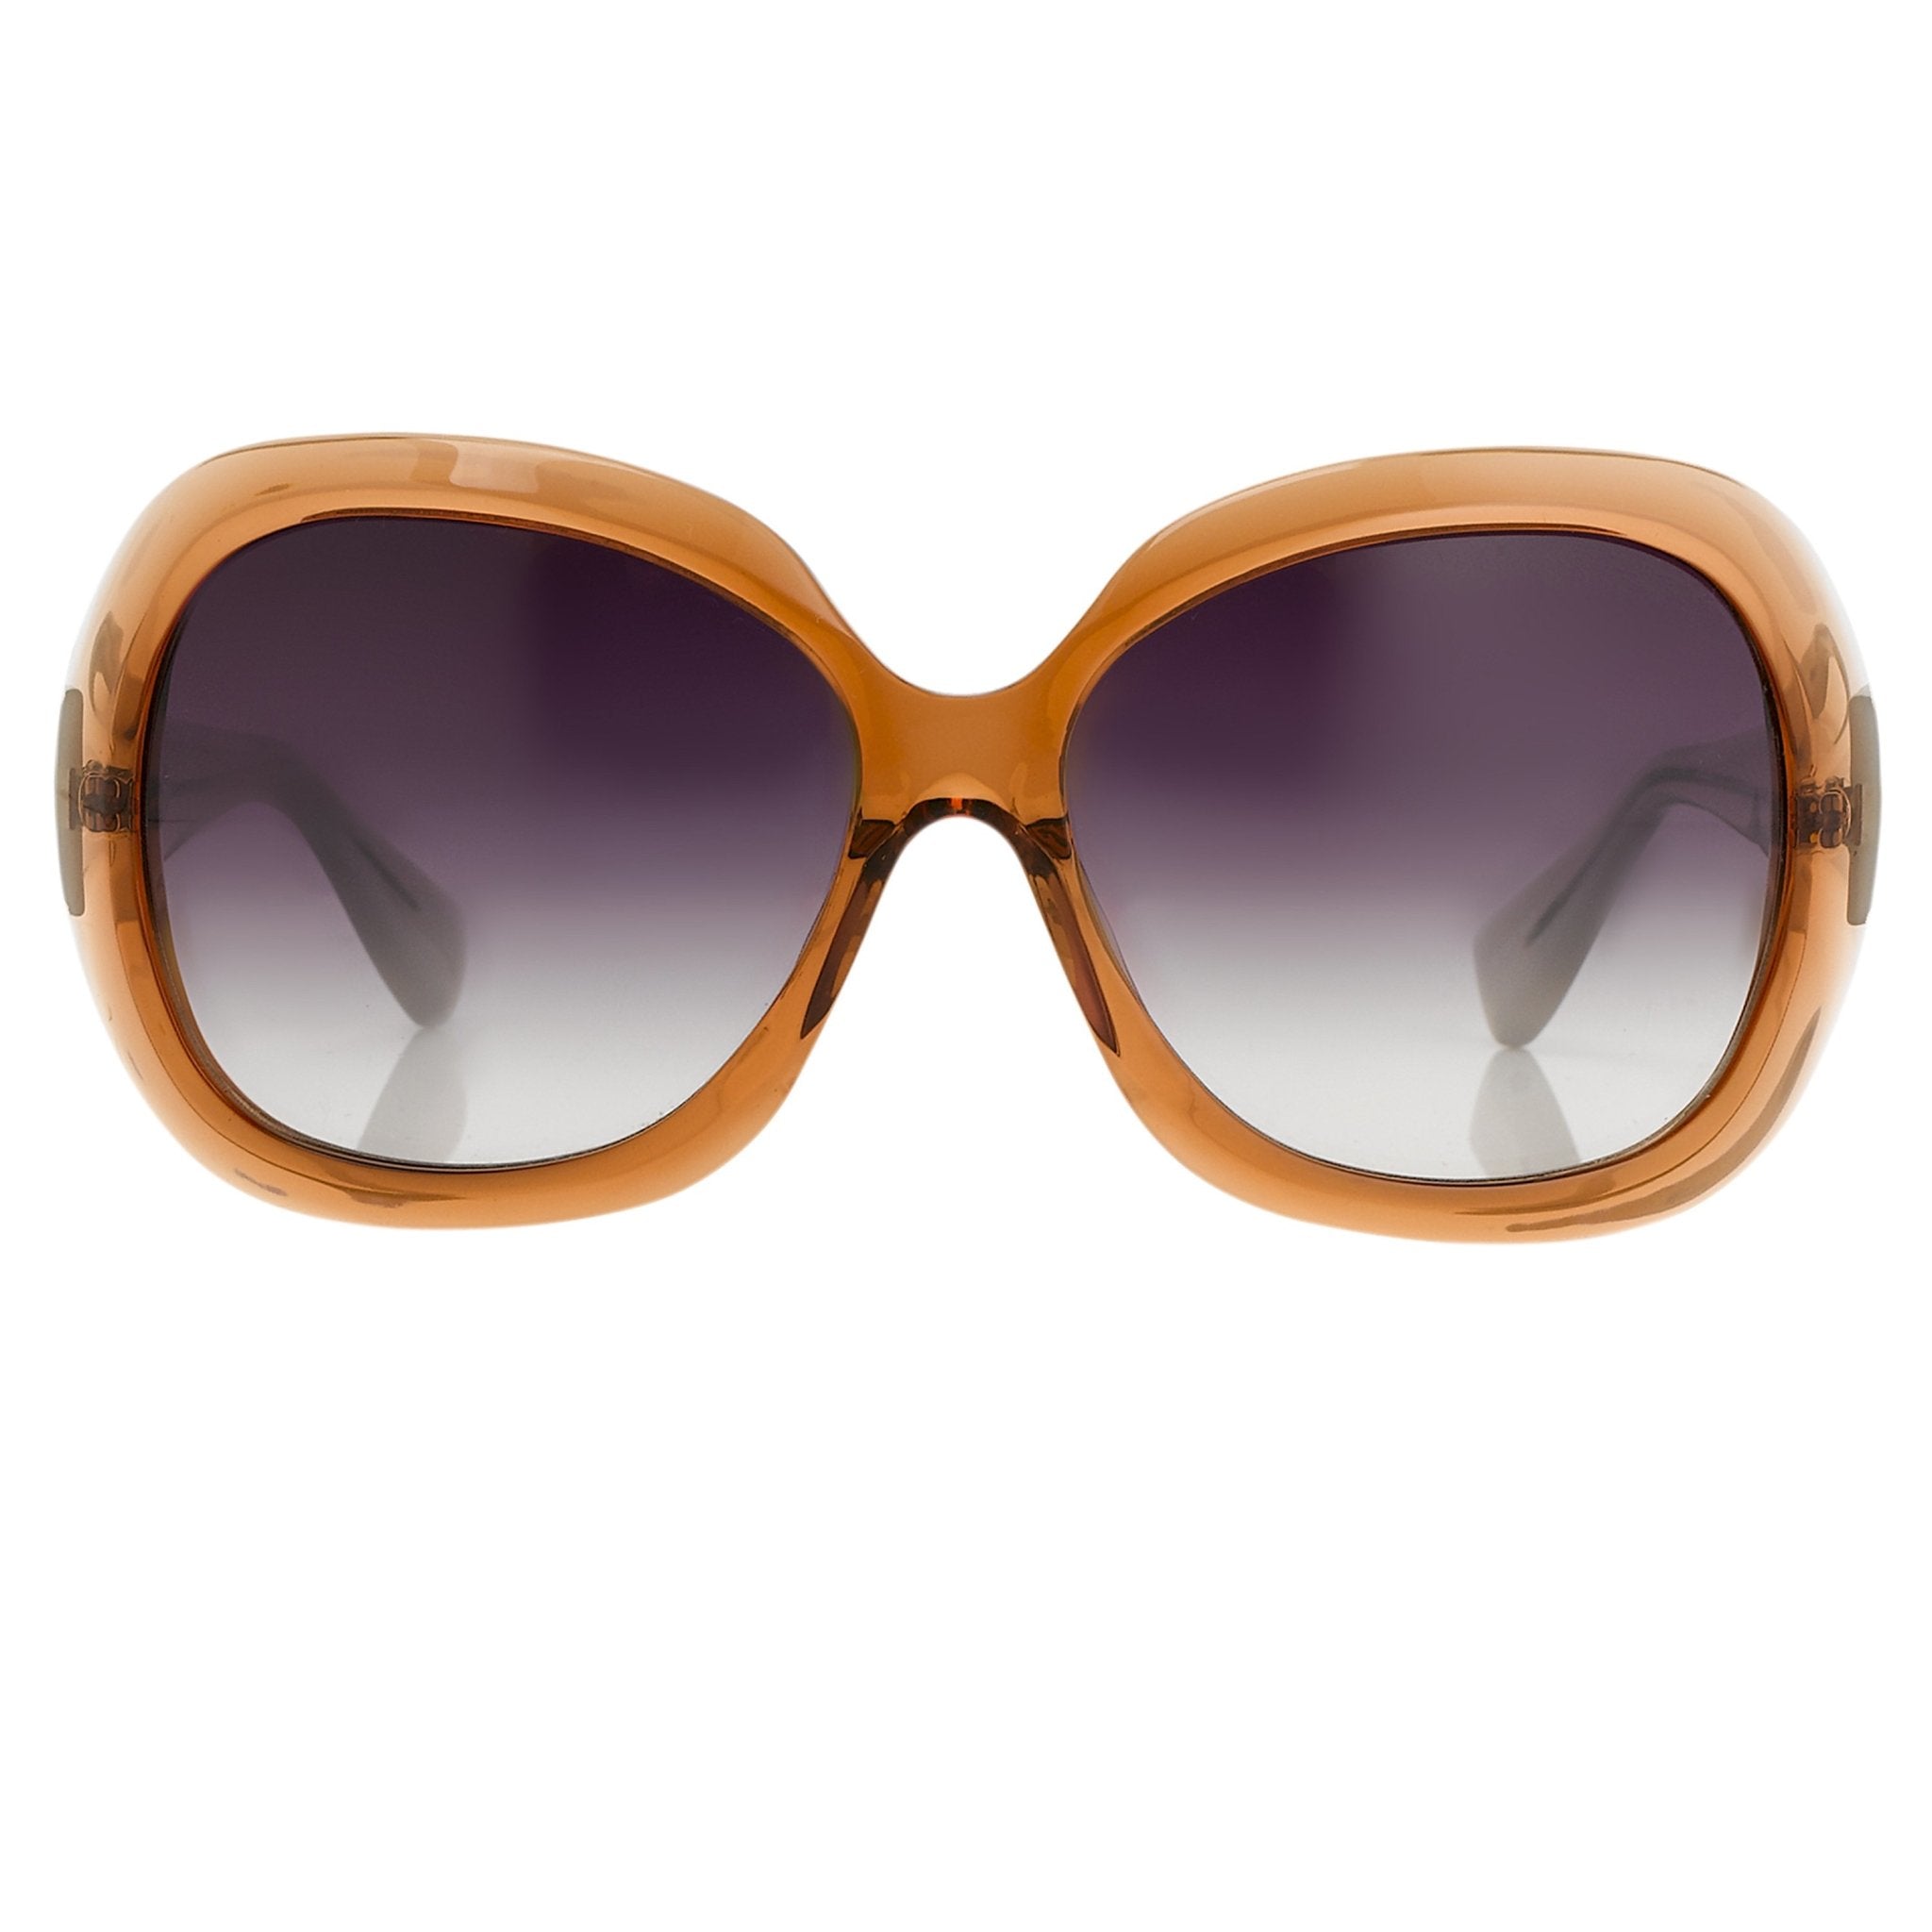 Rue De Mail Sunglasses Oversized Translucent Terracotta with Grey Graduated Lenses RDM2C3SUN - Watches & Crystals